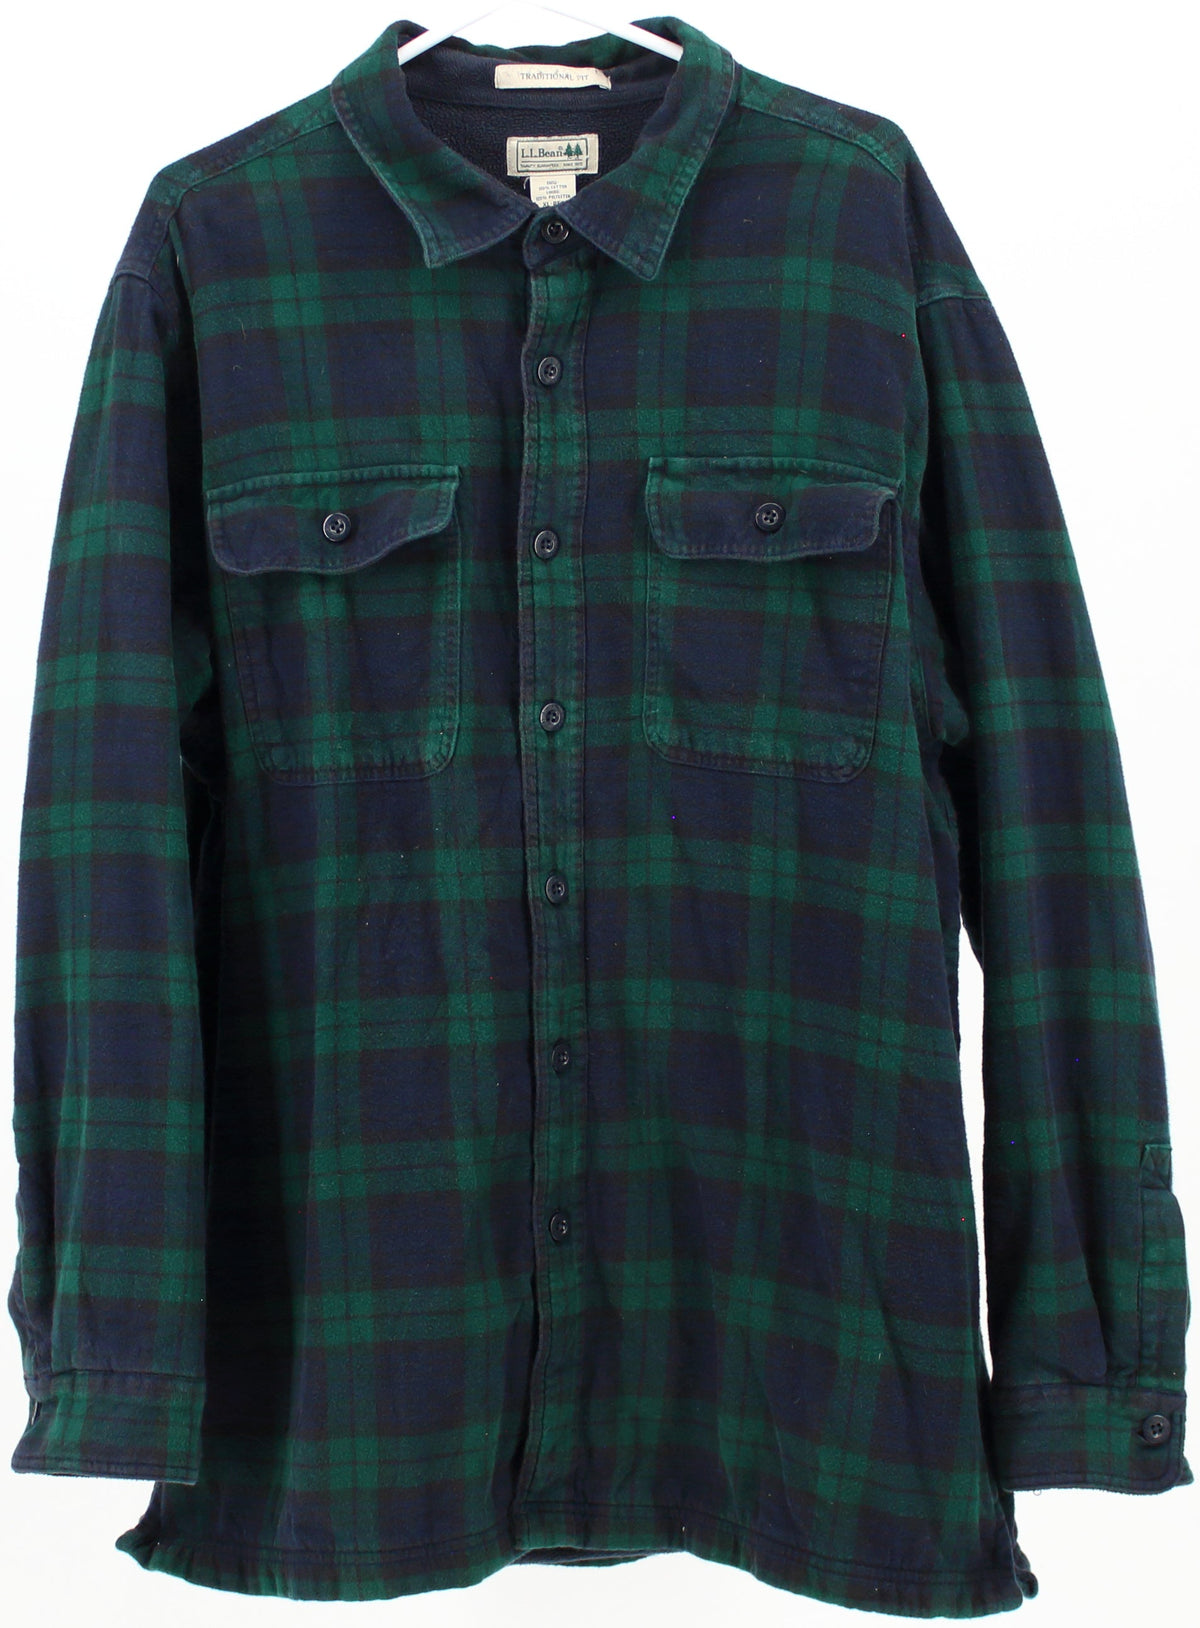 L.L.Bean Navy Blue and Green Plaid Flannel Shirt With Faux Sherpa Lining